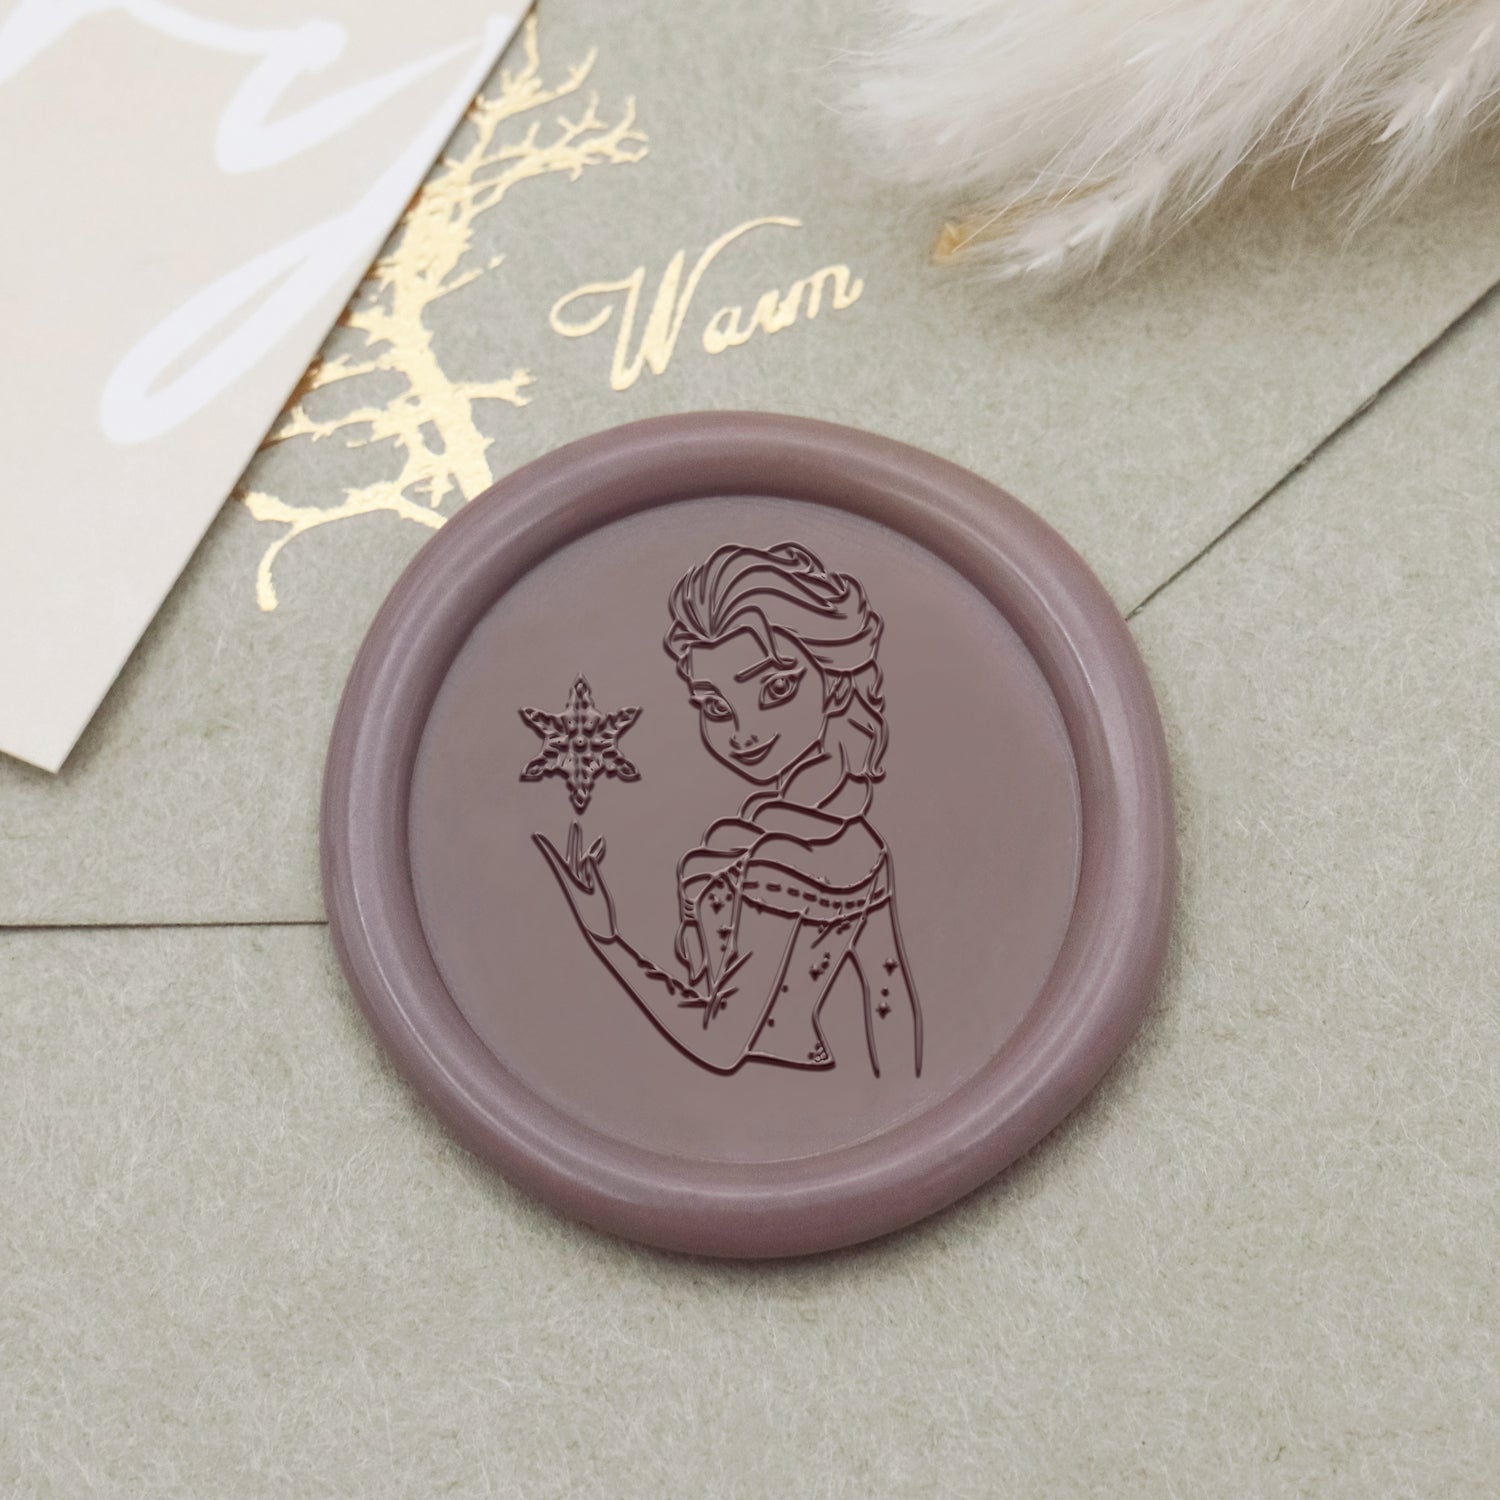 Animated Film Fairytale Character Wax Seal Stamp - 5 1